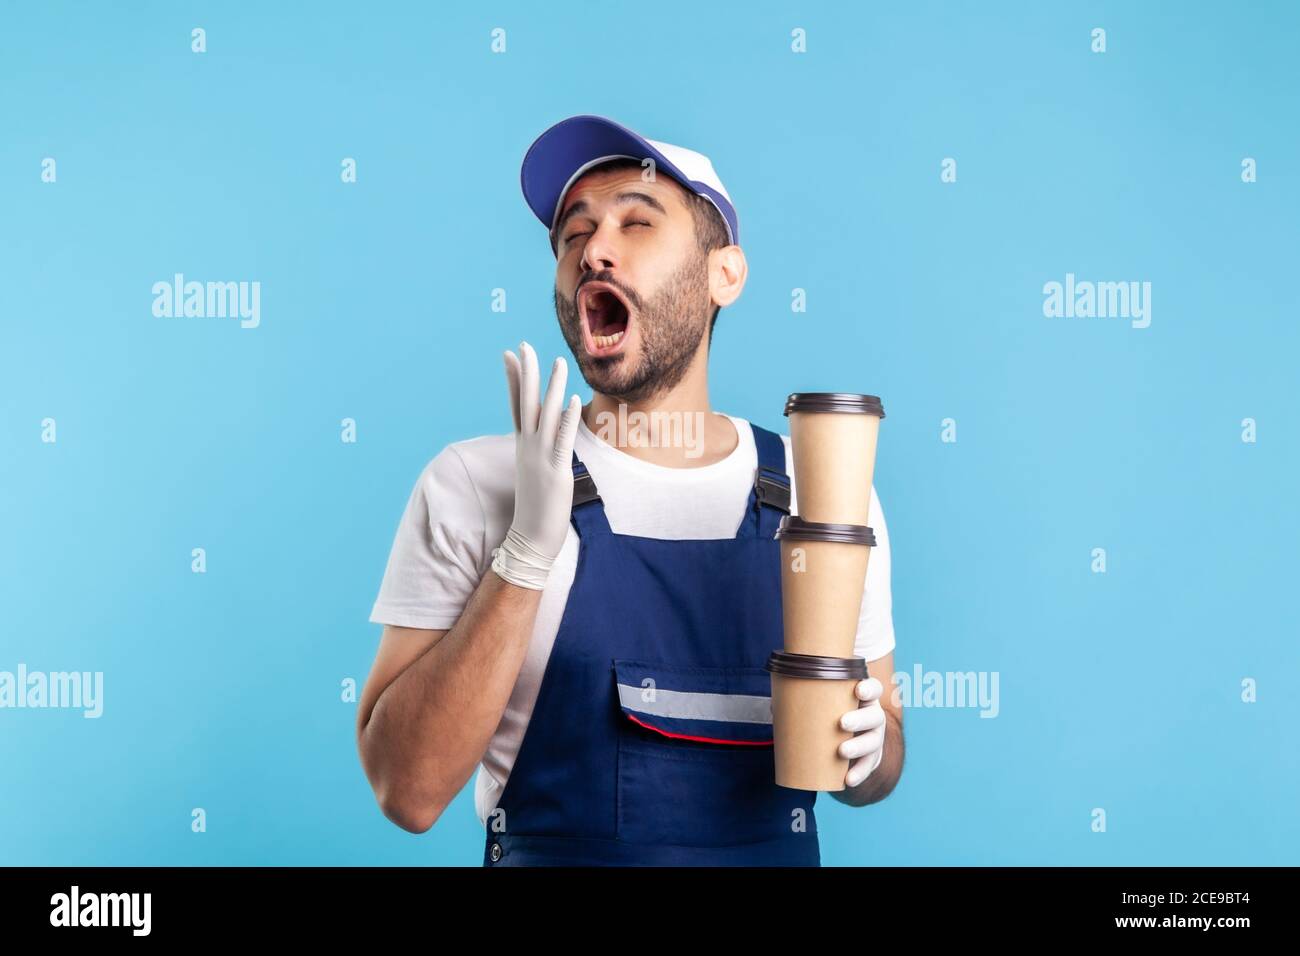 Delivery service. Tired sleepy courier man in blue overalls holding three coffee and yawning with exhausted bored expression, bringing drinks in dispo Stock Photo